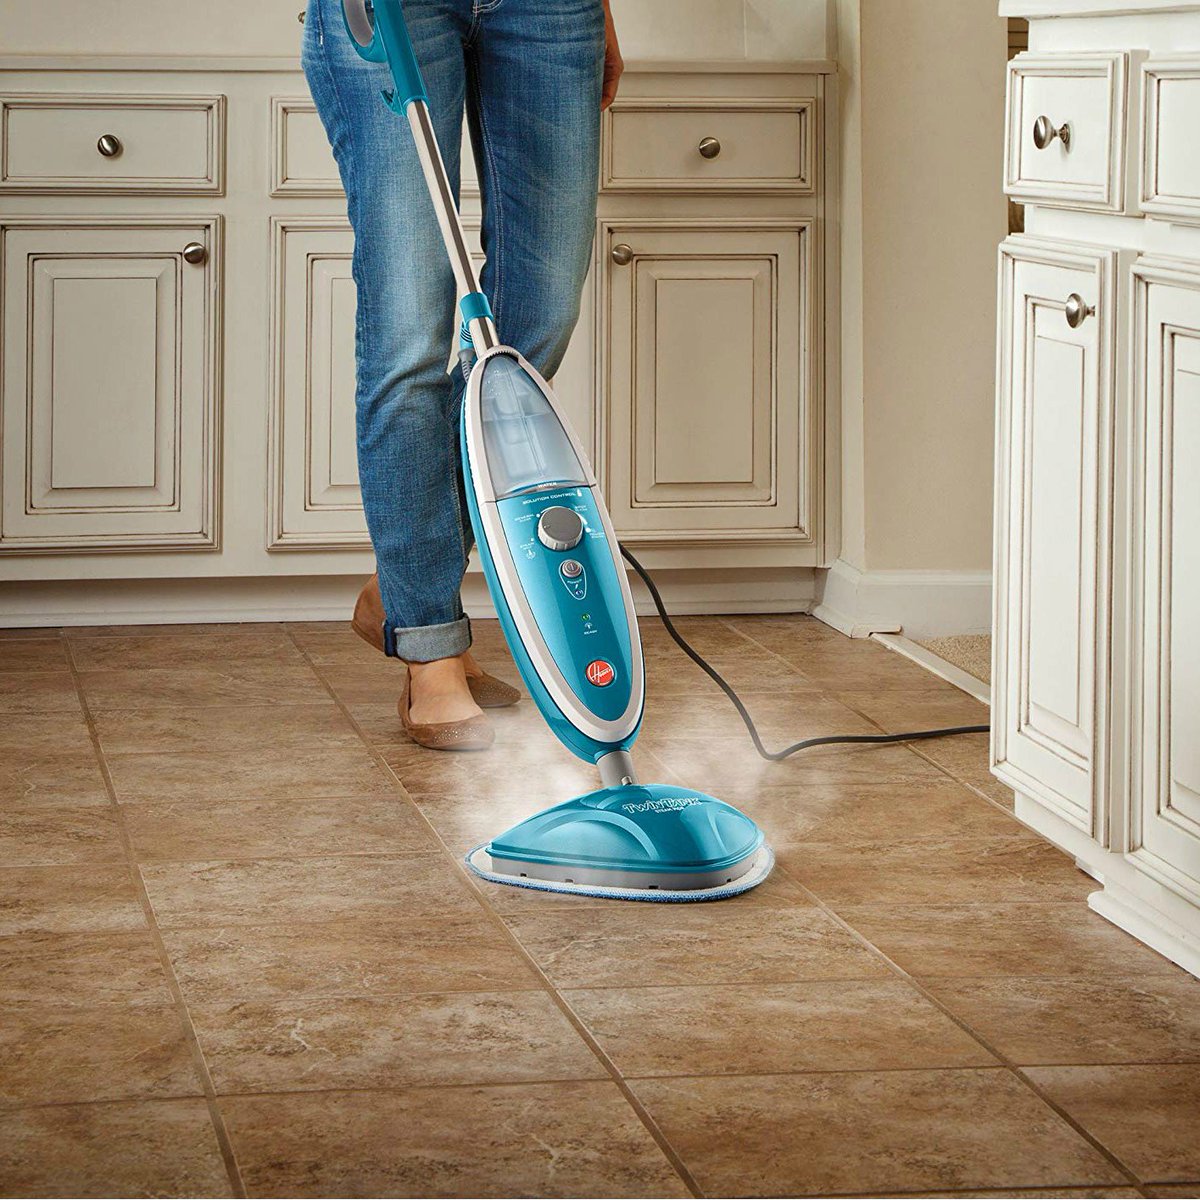 If you want the disinfecting and cleansing power of a steam mop but with an option of injecting a purpose-designed detergent solution when the cleaning gets tough.

See the Hoover TwinTank's review @ ow.ly/GgdE50uAwfO

#SteamMop #productreviews